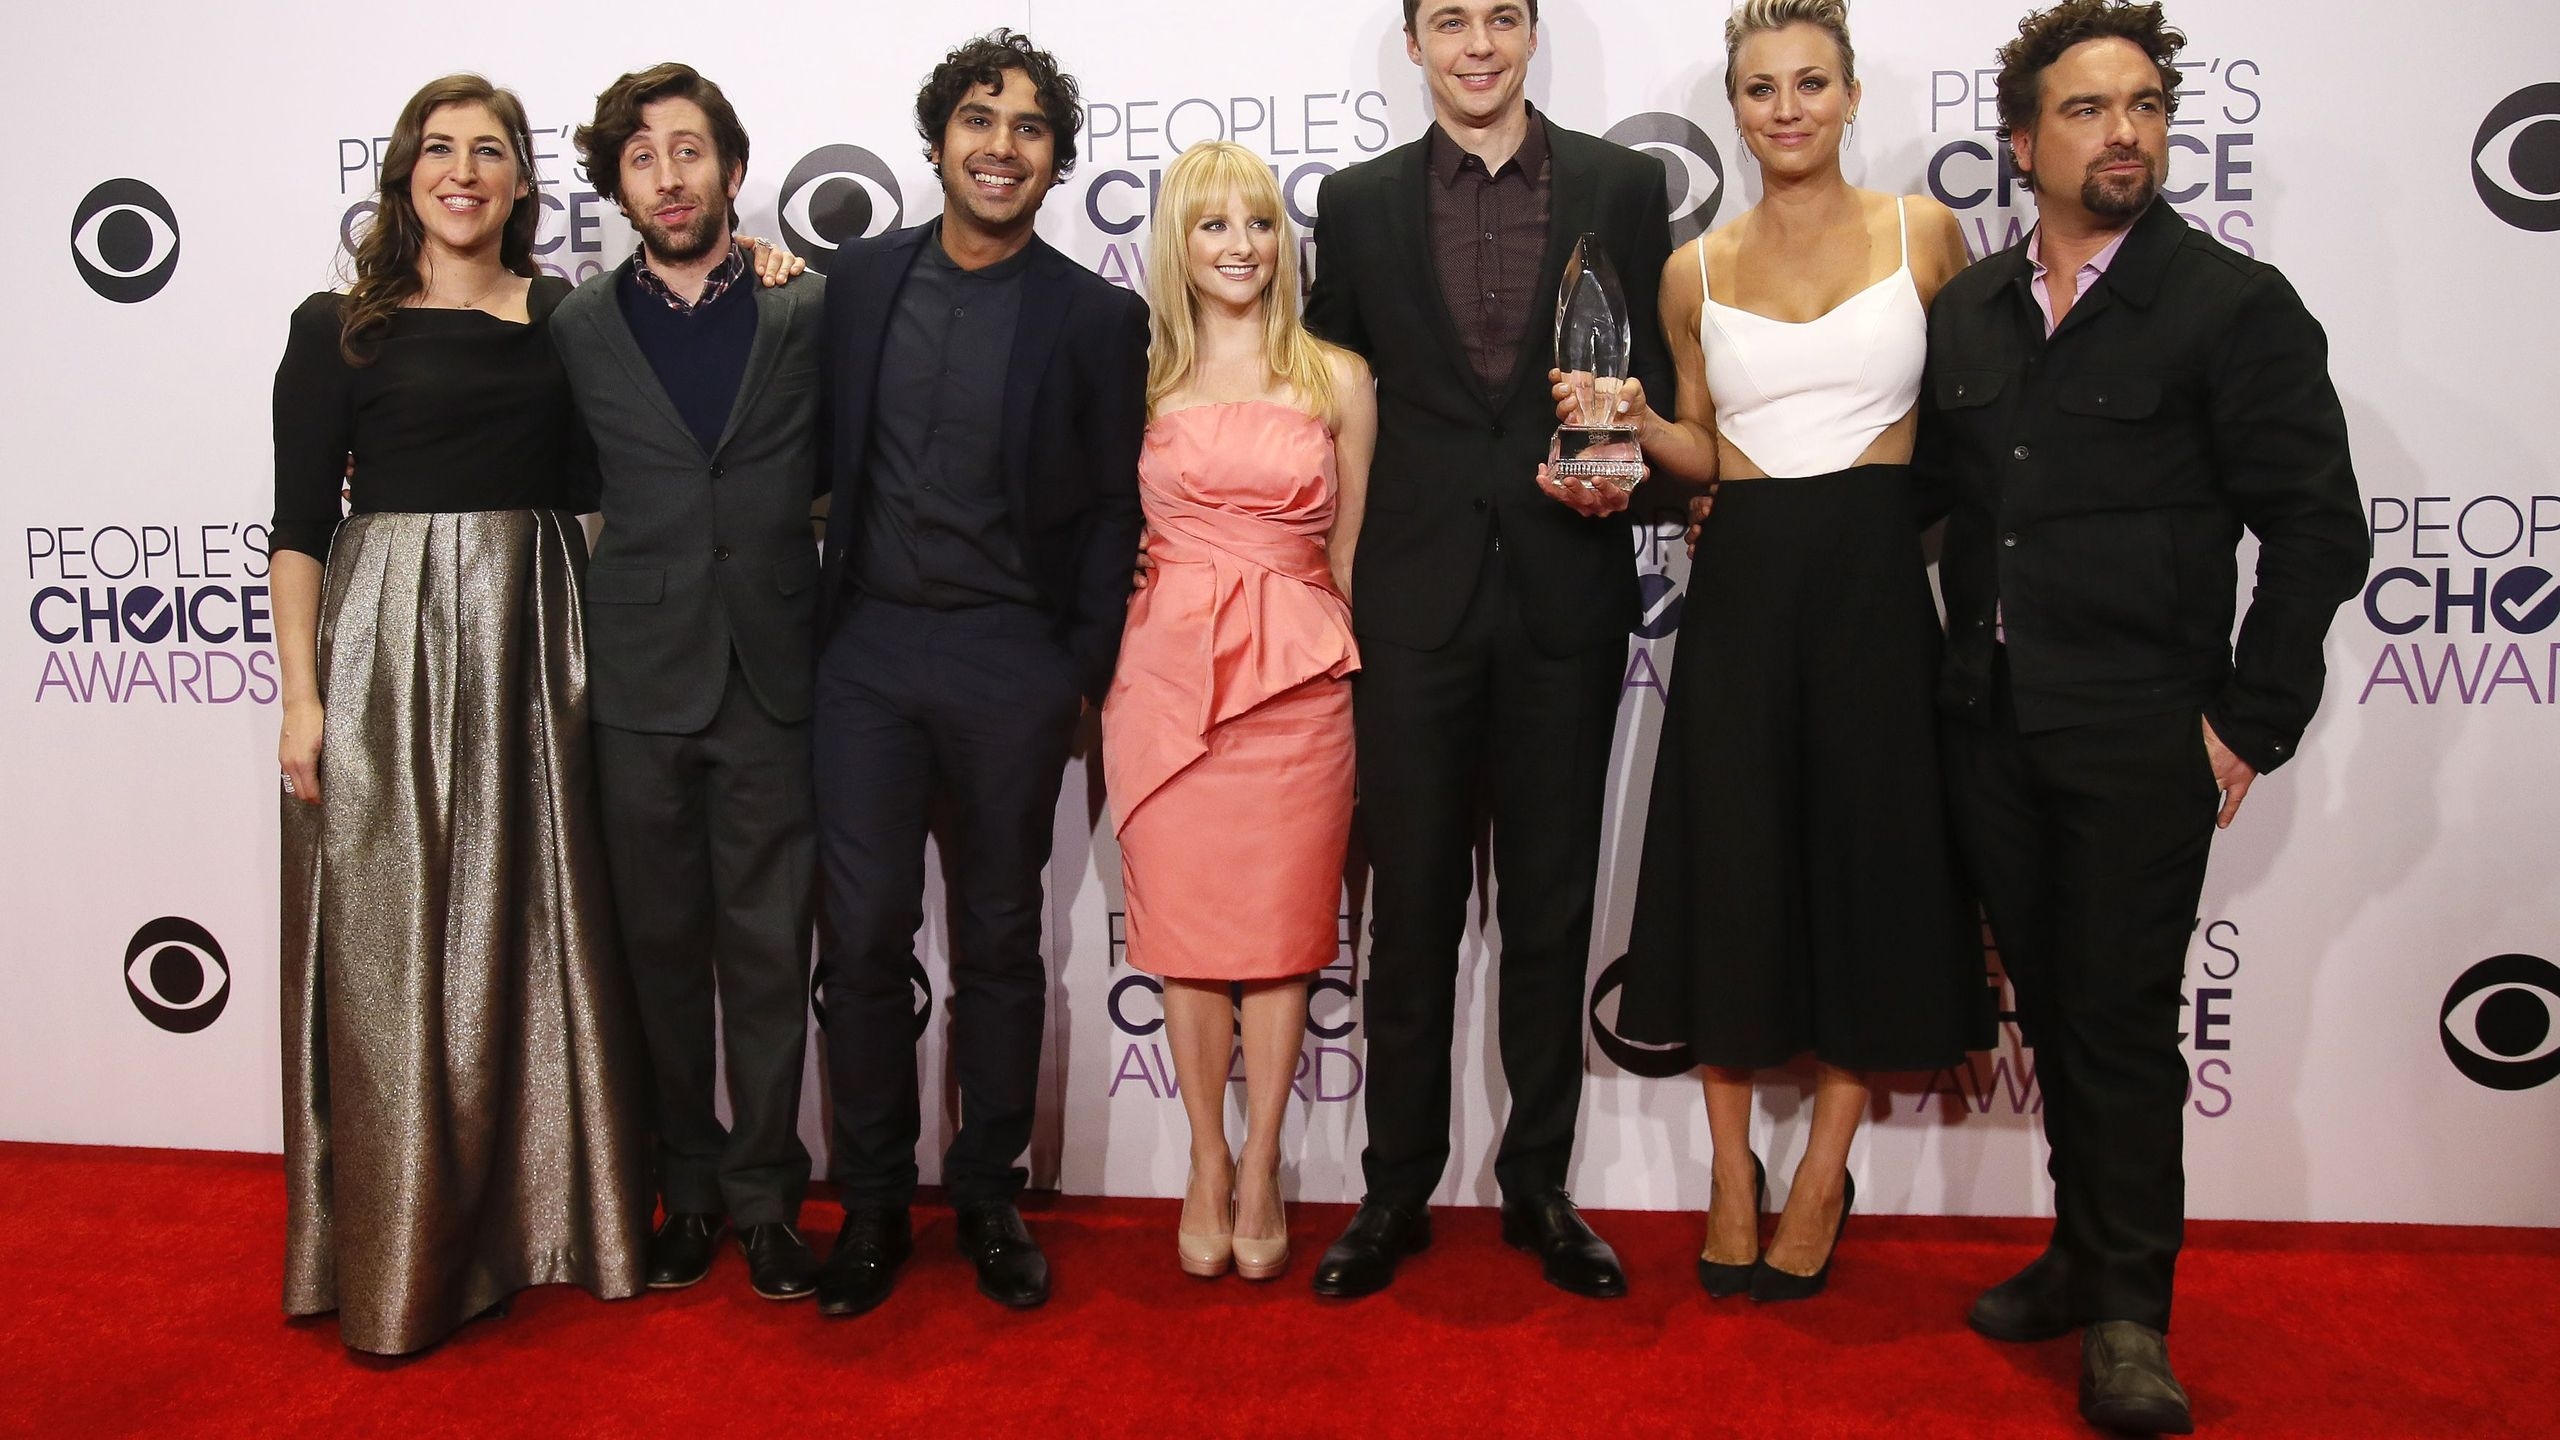 The Big Bang Theory Peoples Choice Awards for 2560x1440 HDTV resolution